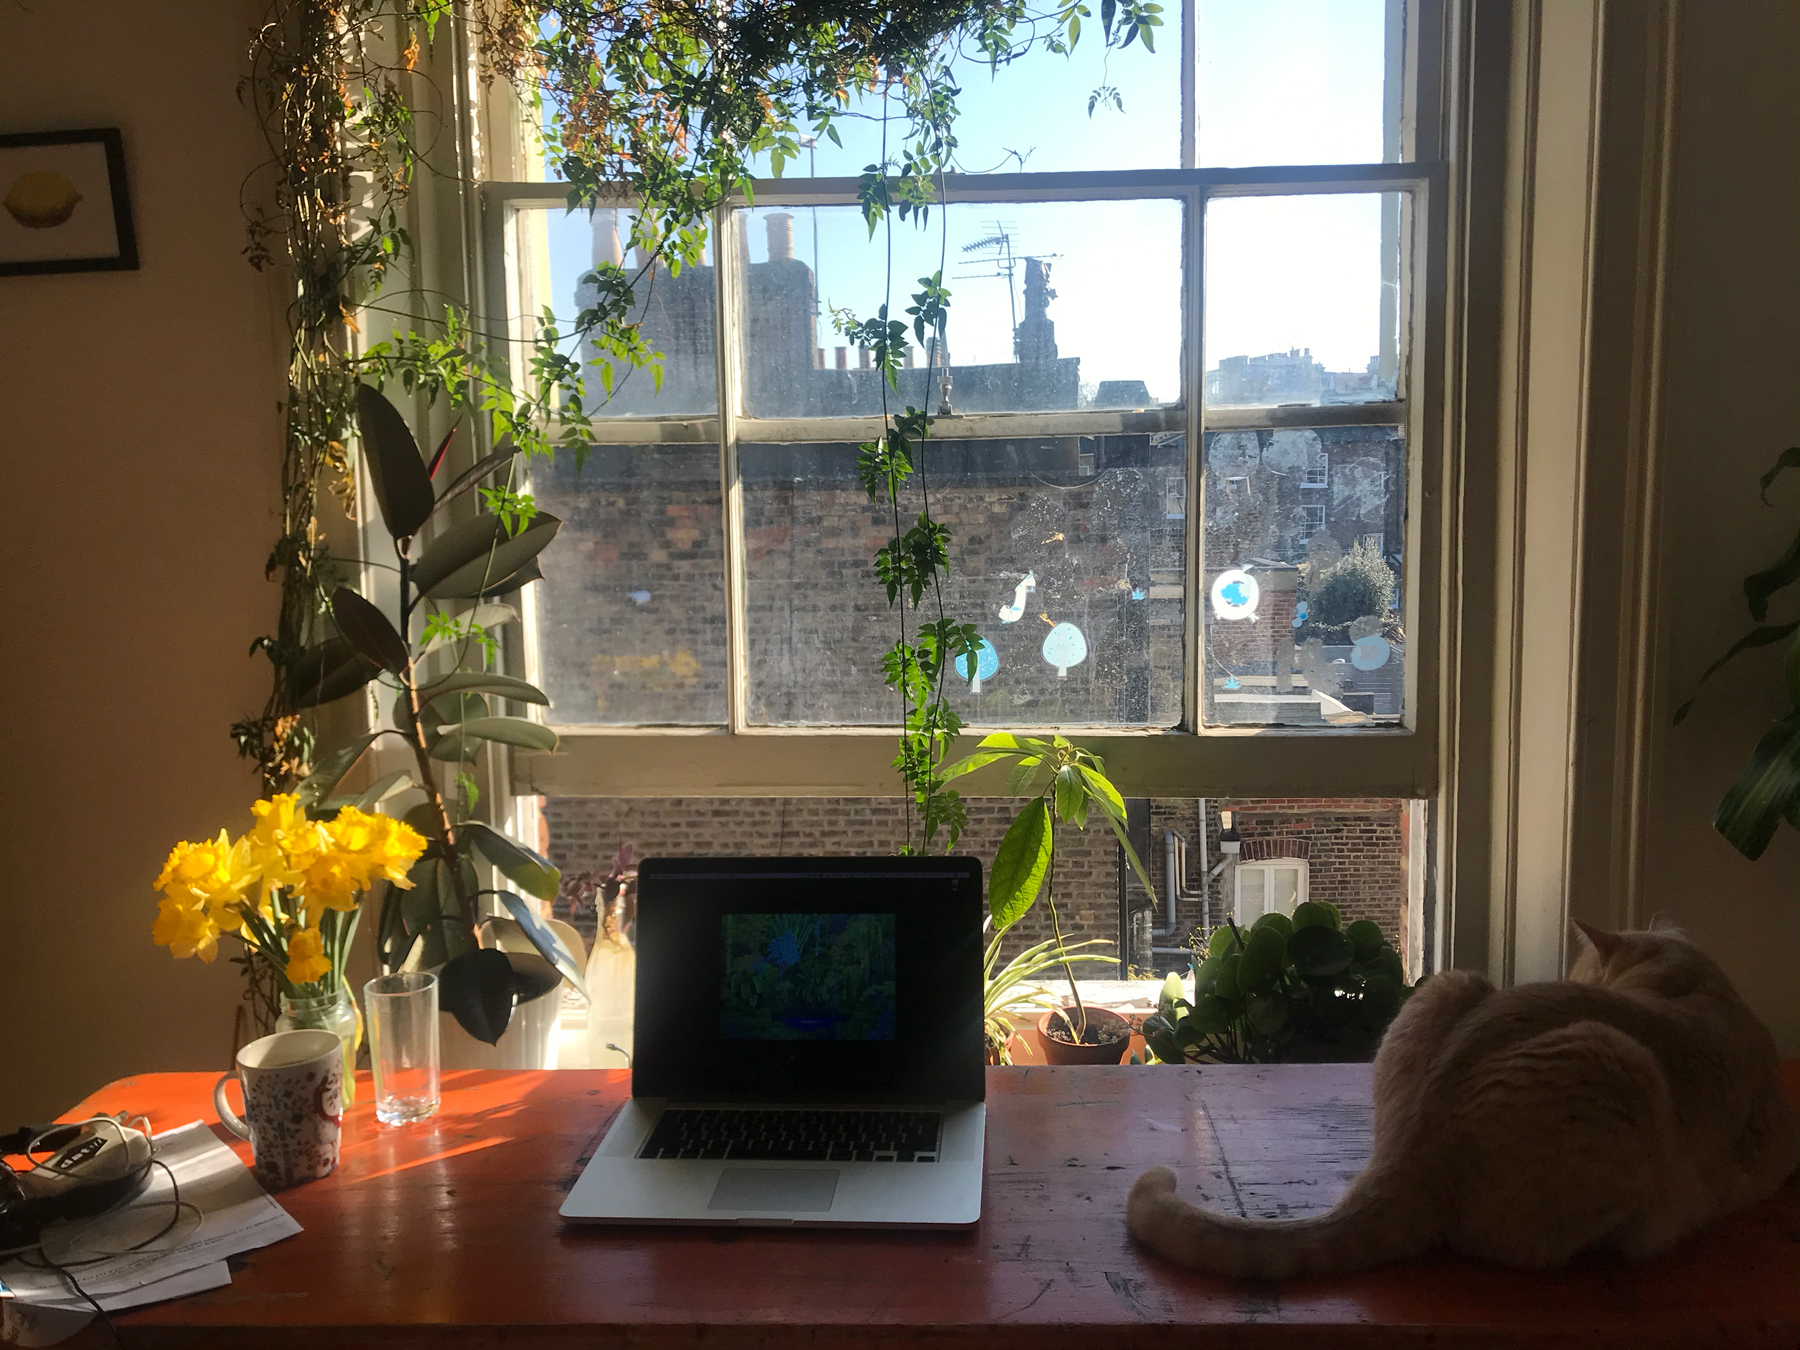 An open laptop on a kitchen table, with a vase of yellow daffodils on the left and an orange cat on the right. Outside there are rooftops and a very blue sky.